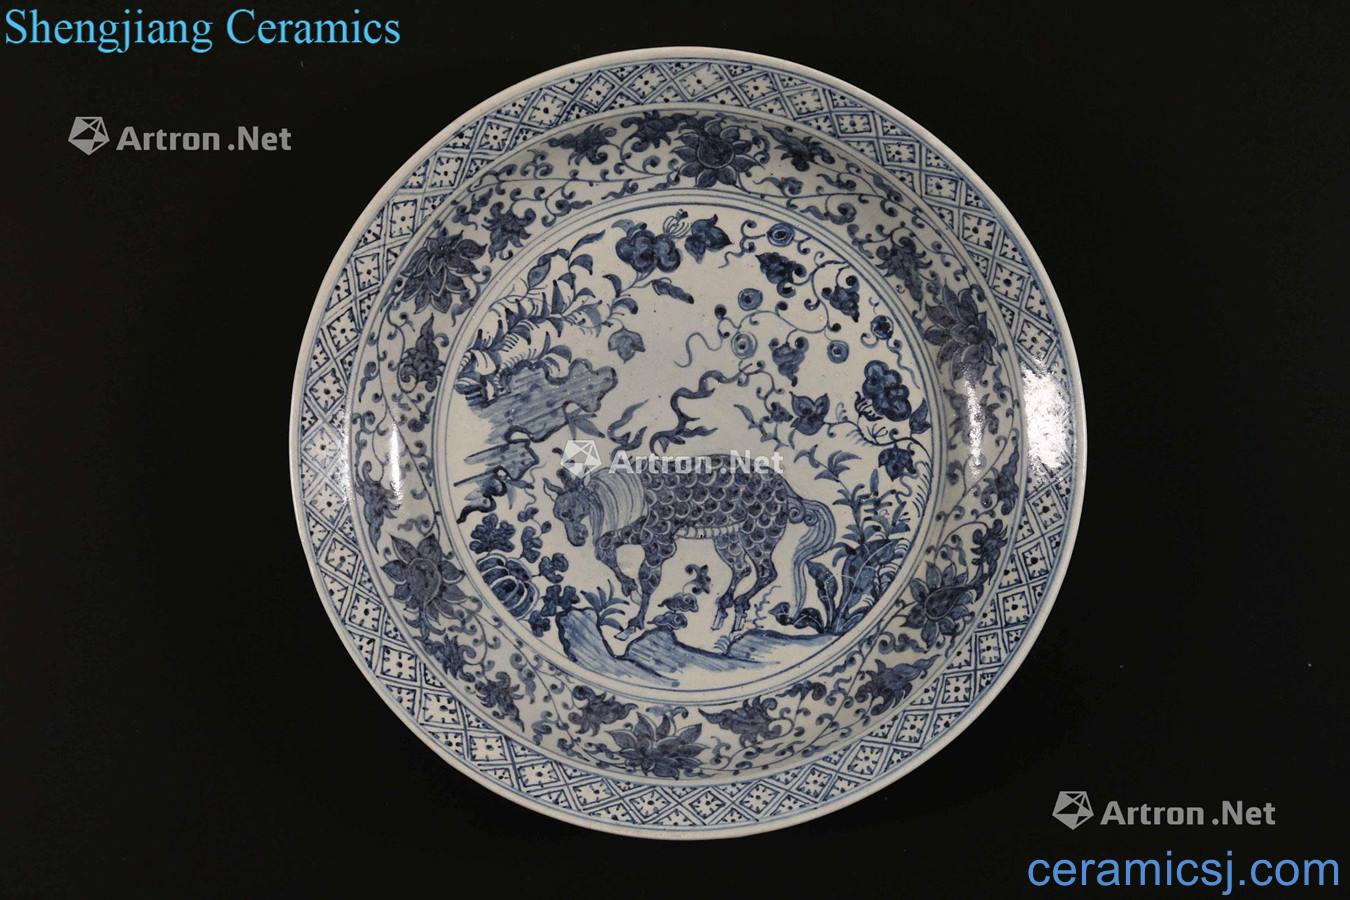 The 16 th century A MASSIVE BLUE AND WHITE POTTERY DISH DEPICTING A QILINCHINA/one